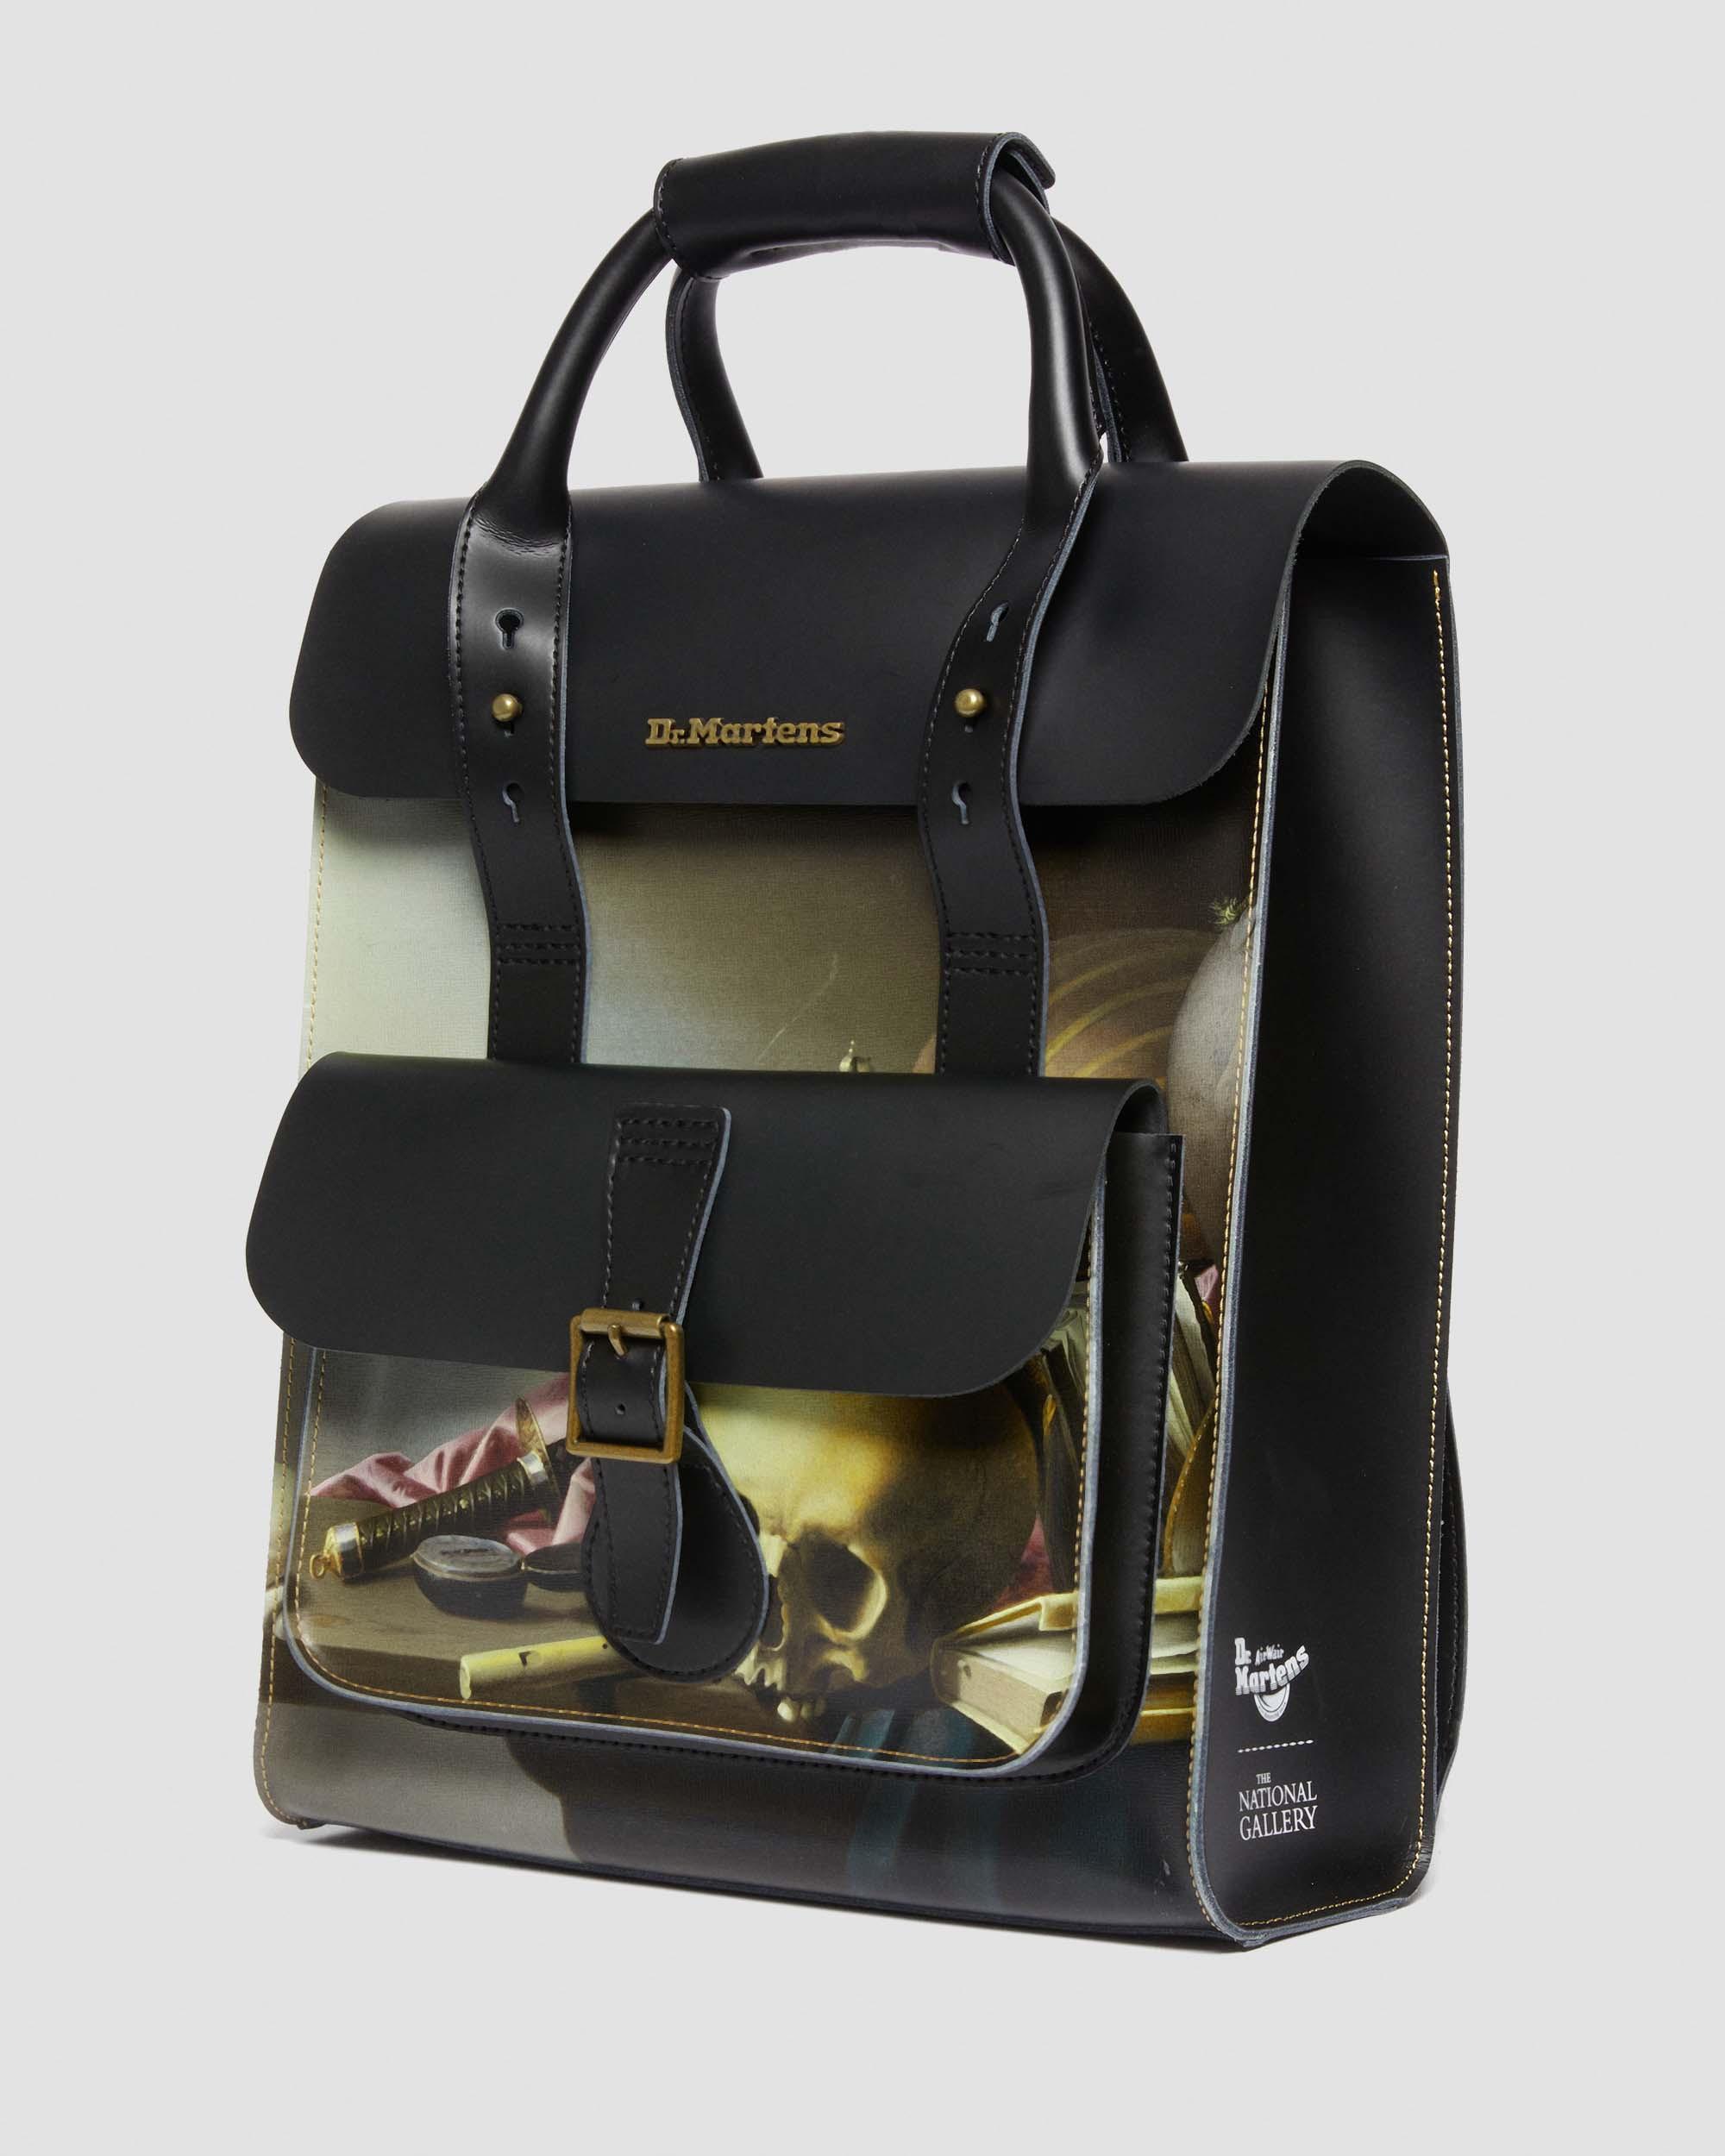 THE NATIONAL GALLERY HARMEN STEENWYCK LEATHER BACKPACK